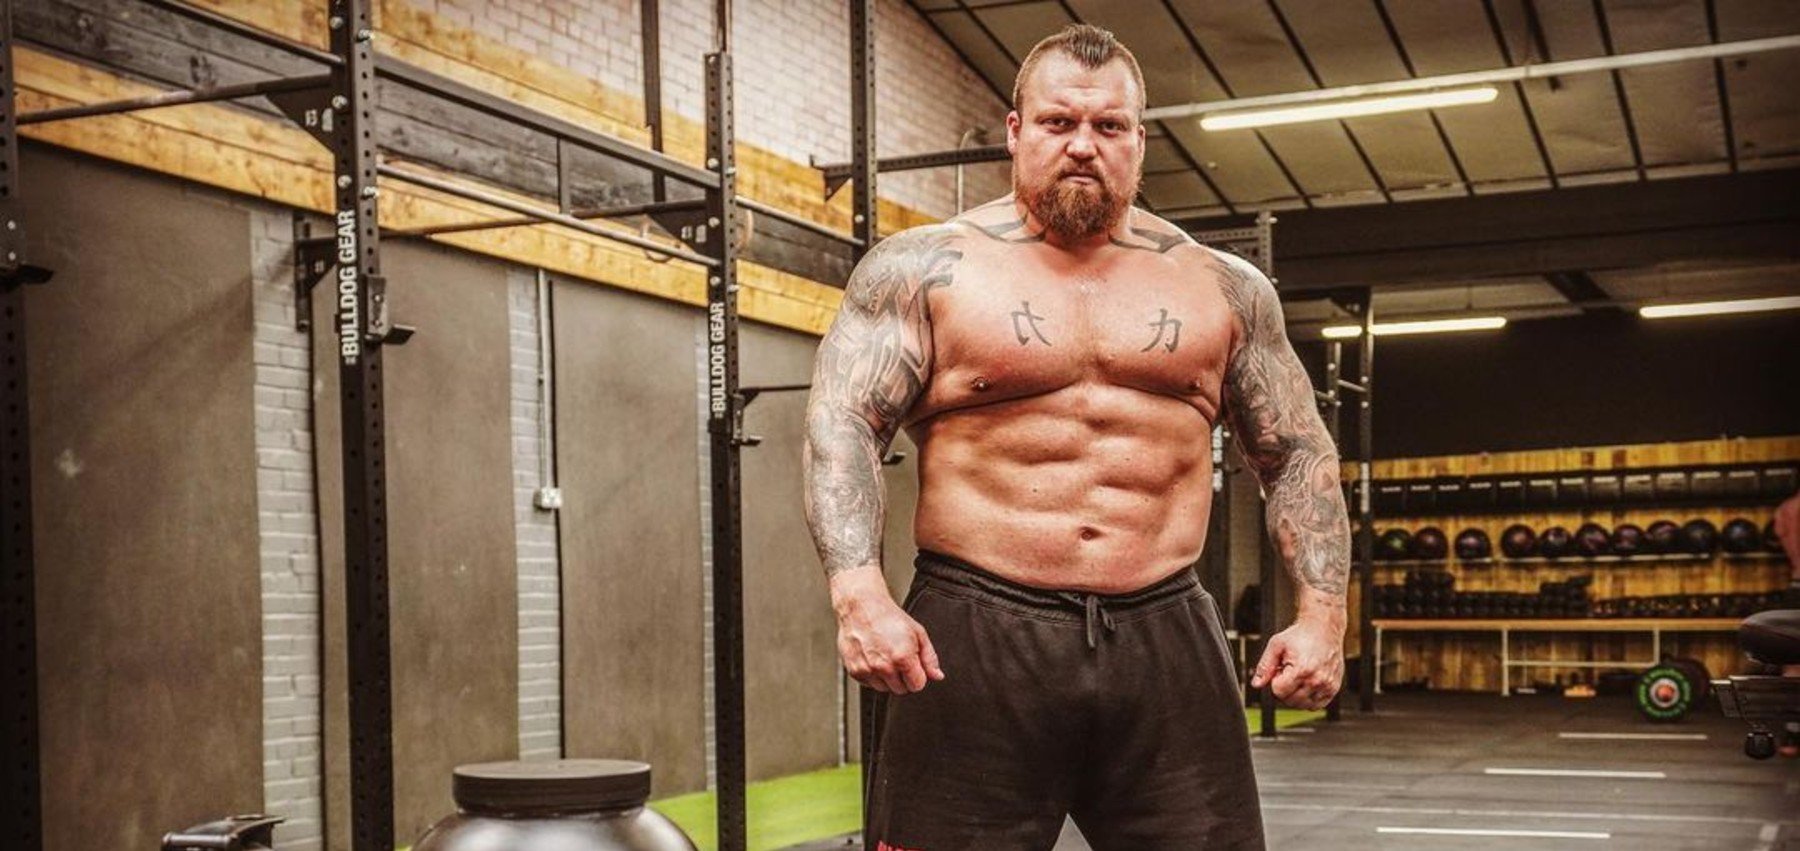 How To Deadlift Like The Beast | Eddie Hall’s 3 Top Tips